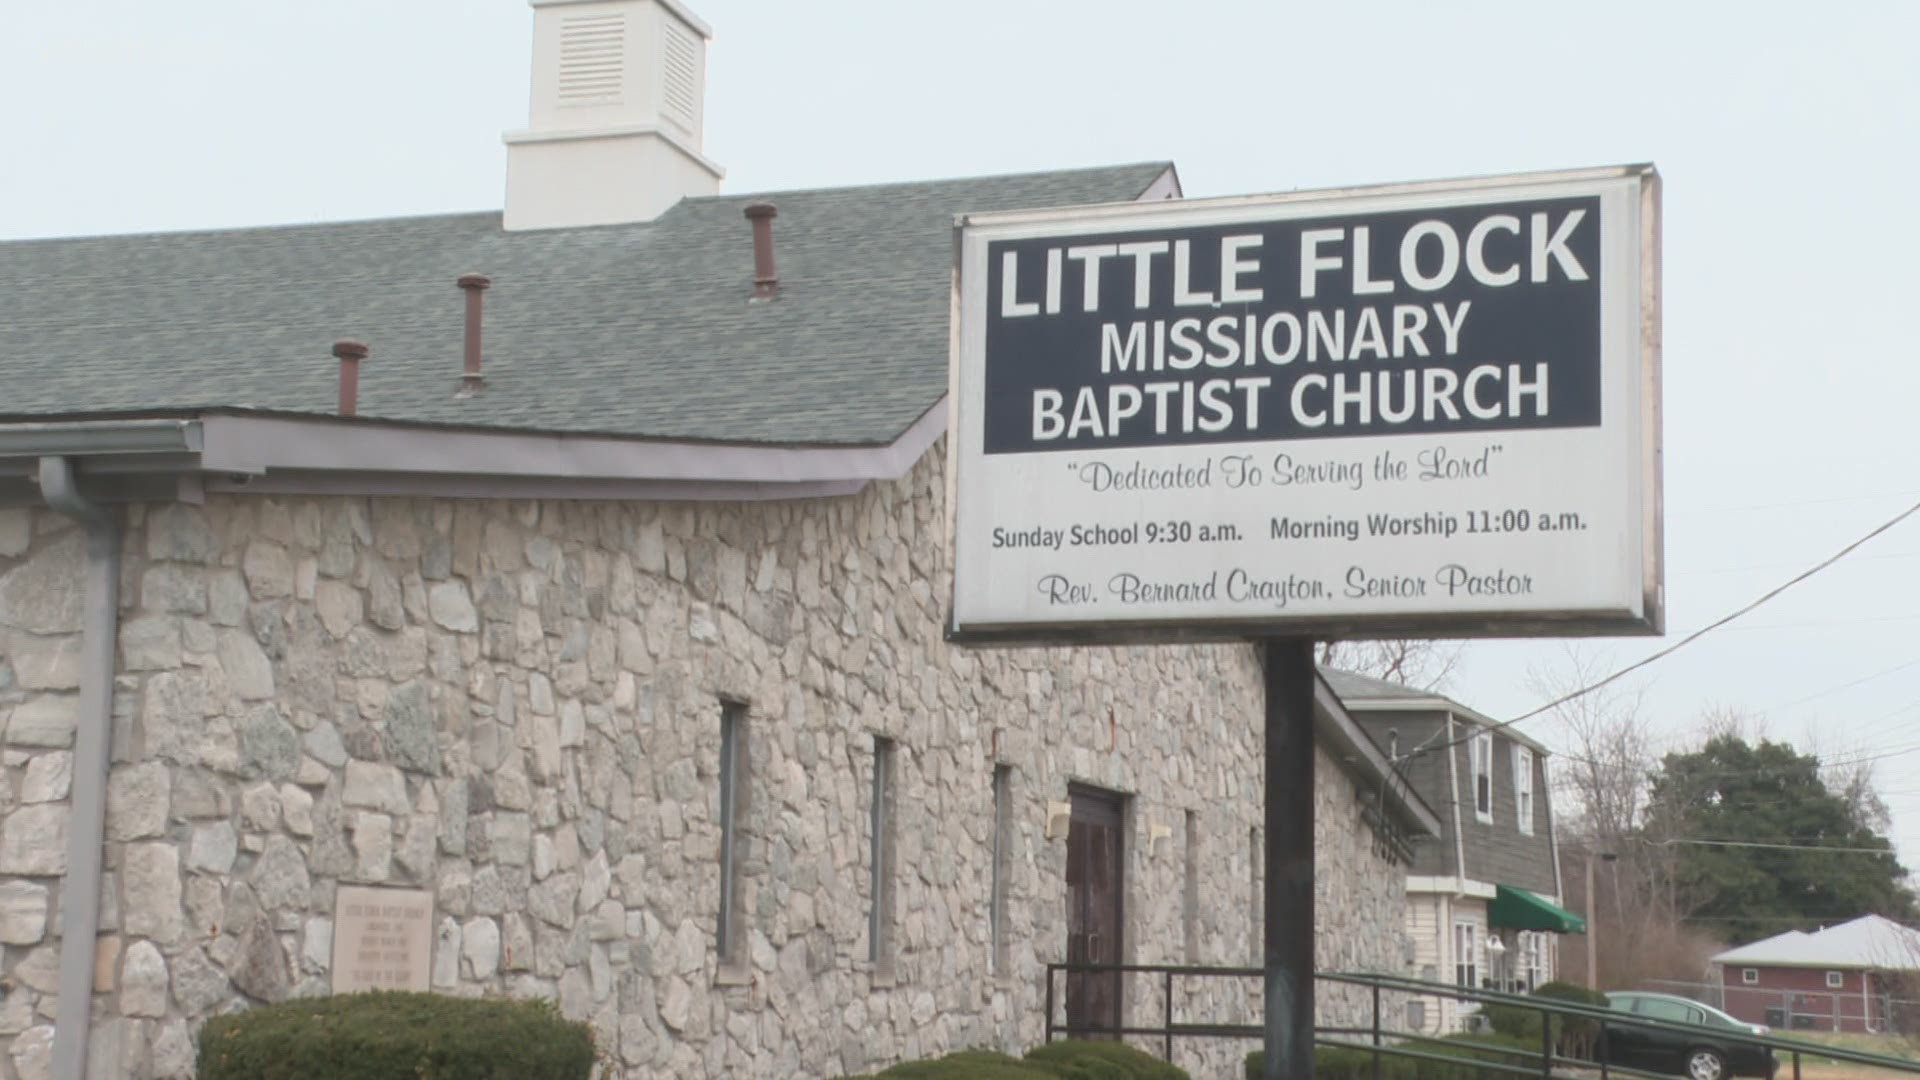 Little Flock Missionary Baptist Church was attacked during the summer protests and has faced some setbacks. But due to their unwavering faith, they press on.